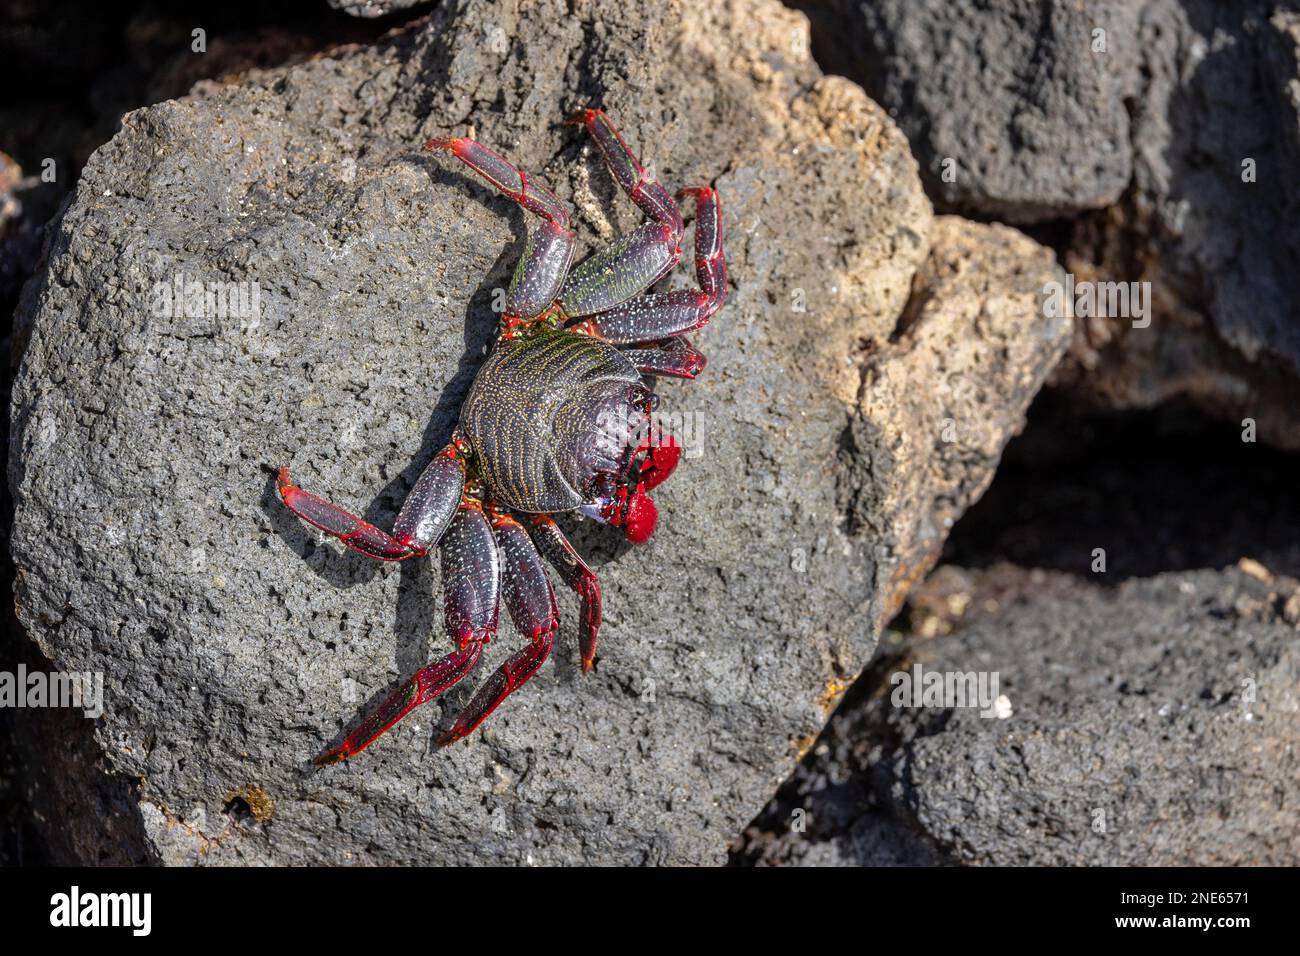 Eastern Atlantic Sally lightfoot crab, Mottled shore crab (Grapsus adscensionis), laying on lava stones at the coast, Canary Islands, Lanzarote, Stock Photo